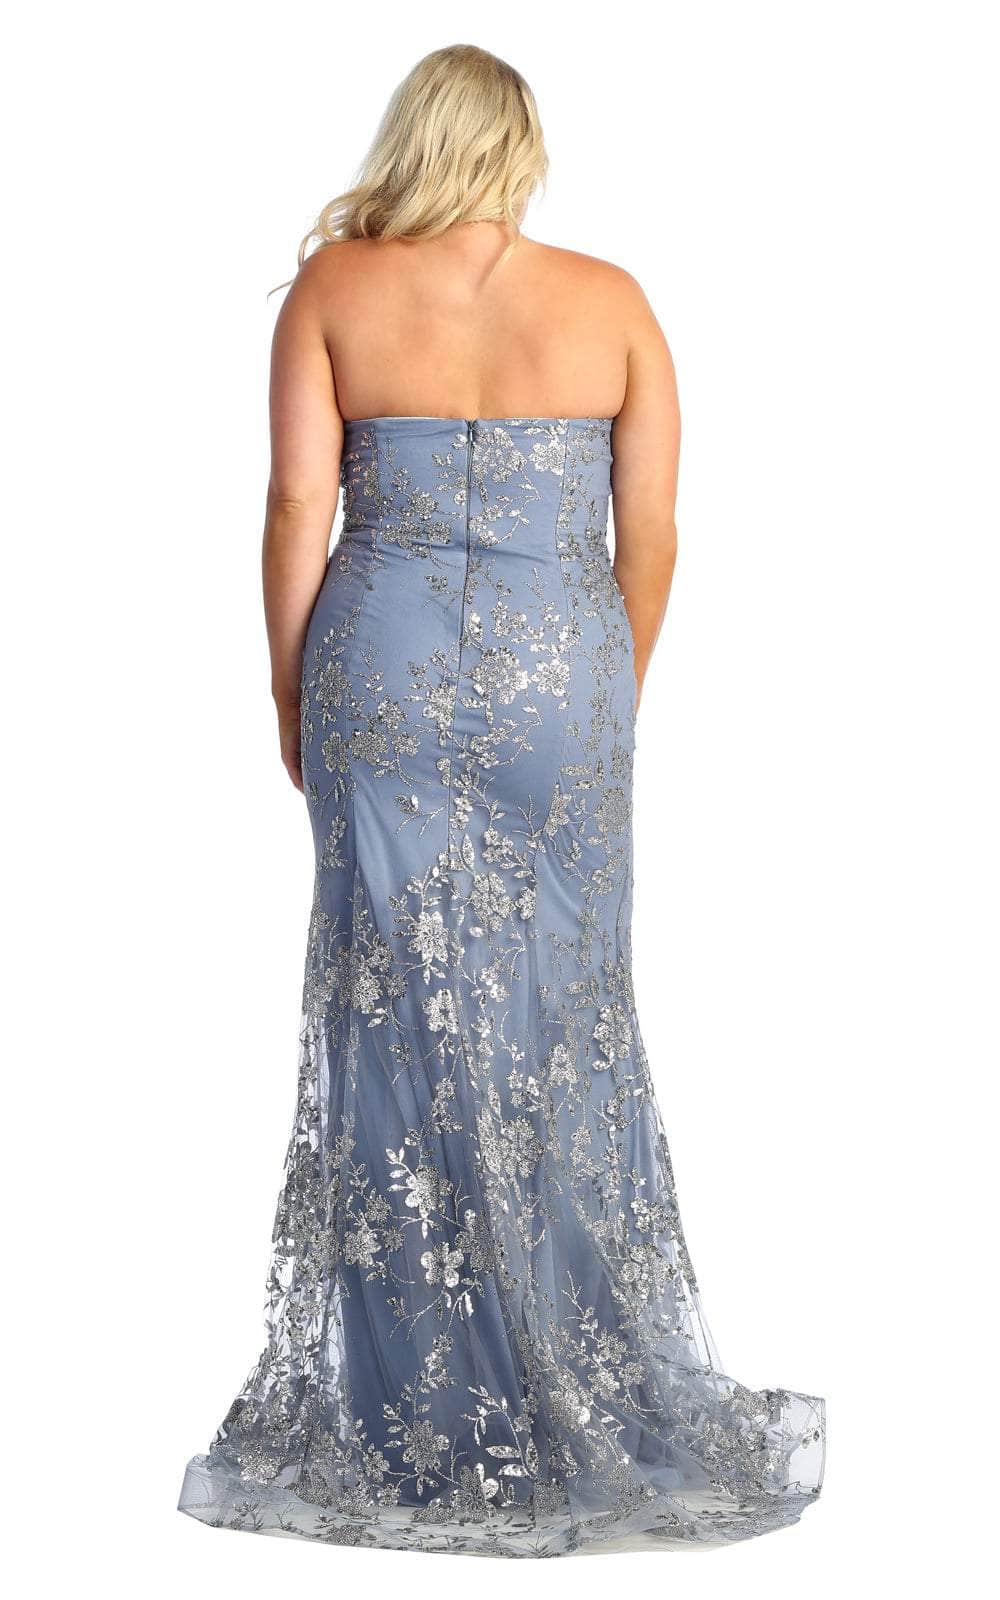 May Queen MQ1921 - Embroidered Sheath Evening Dress Special Occasion Dress